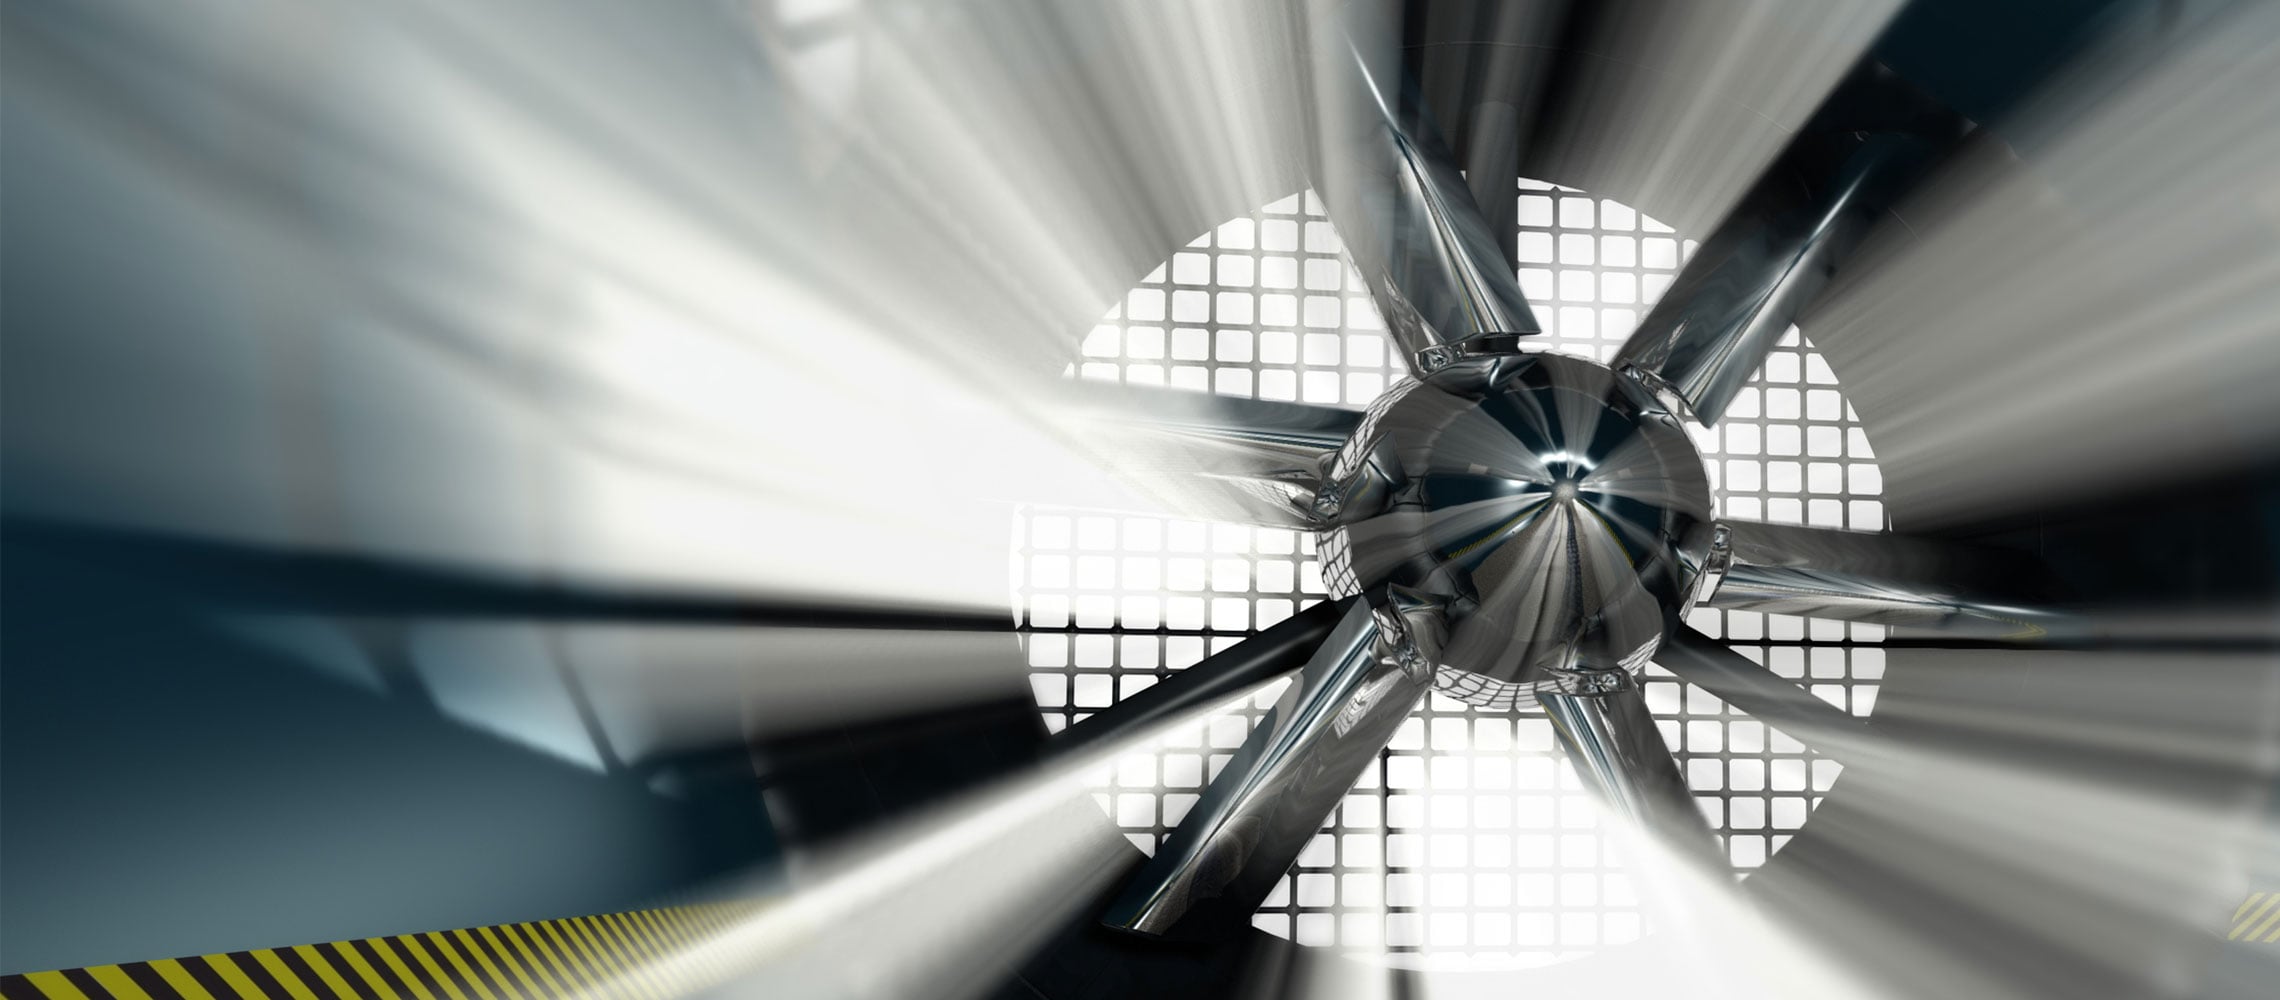 Pioneering wind tunnel system | 42 Technology